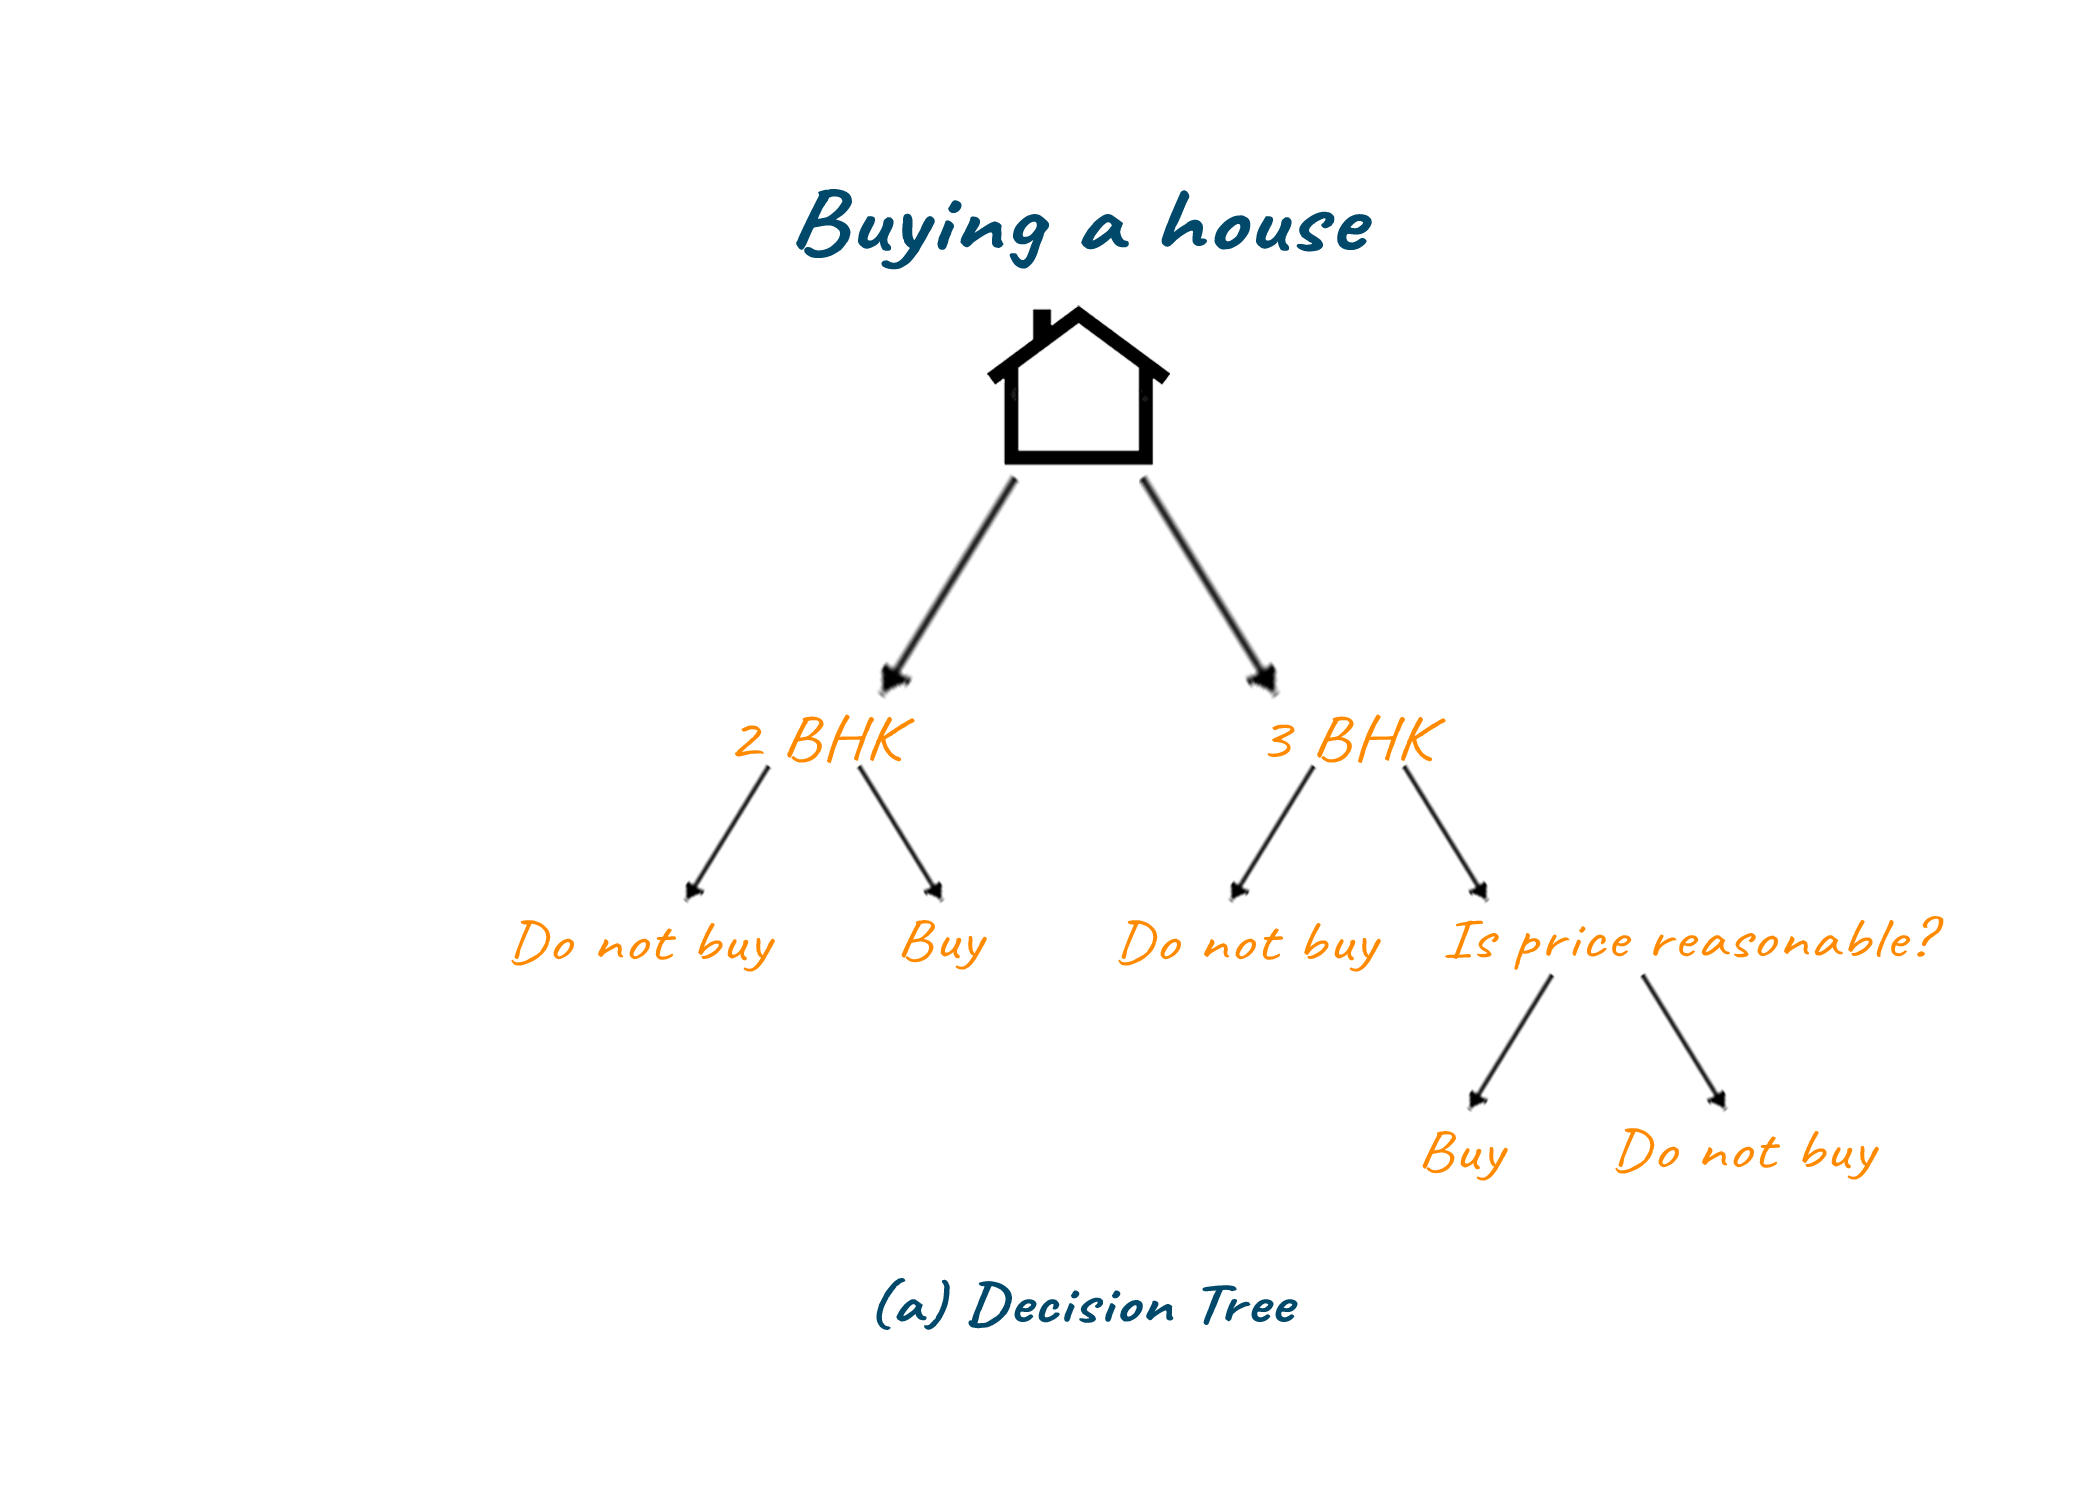 Explanation of decision tree with buying a house example